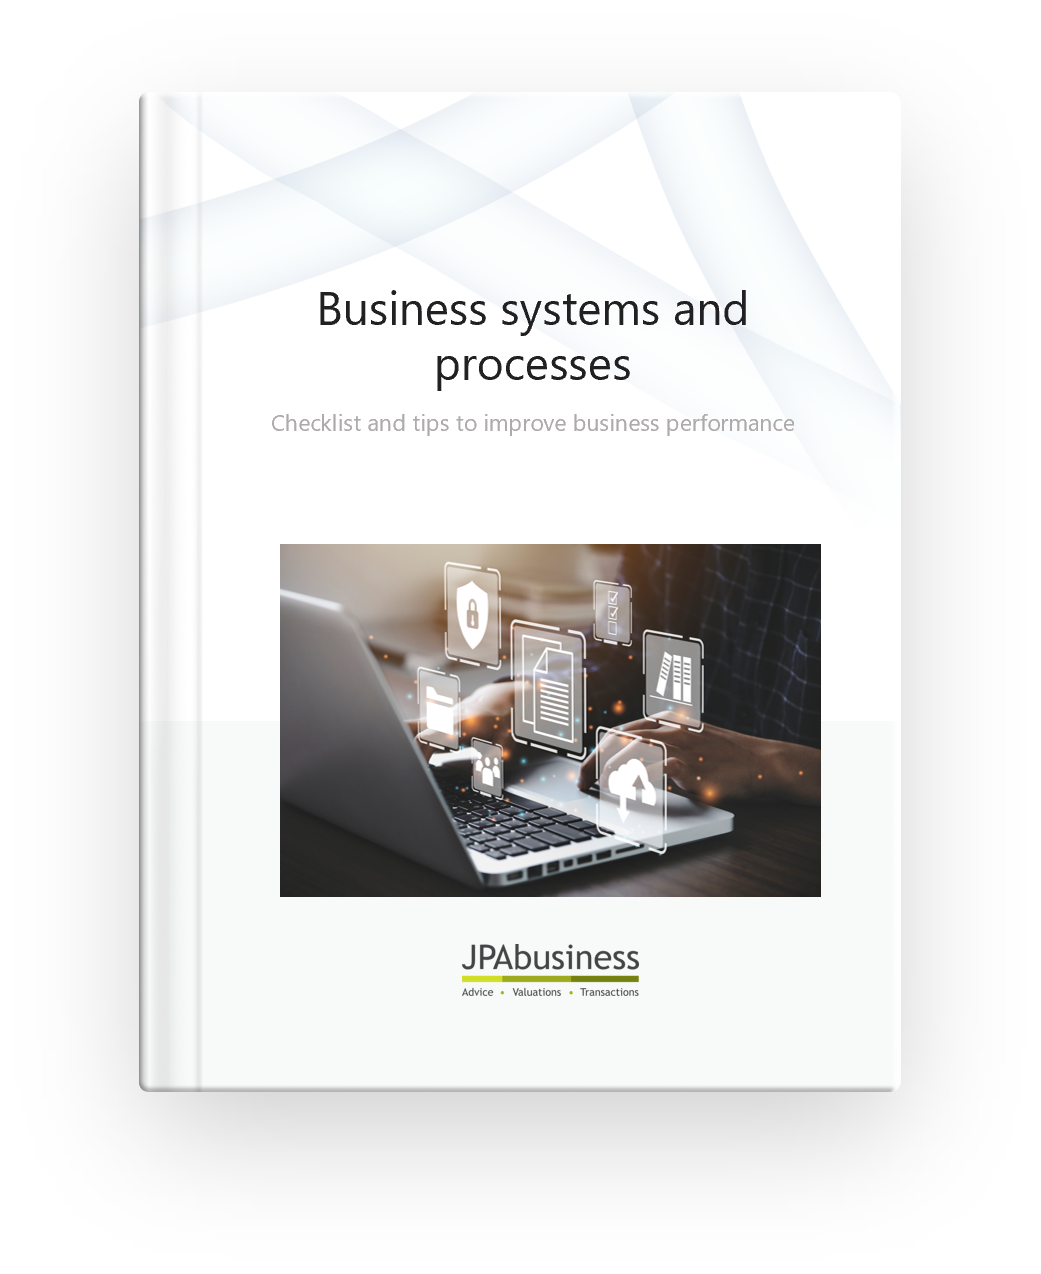 Business systems and processes ebook cover